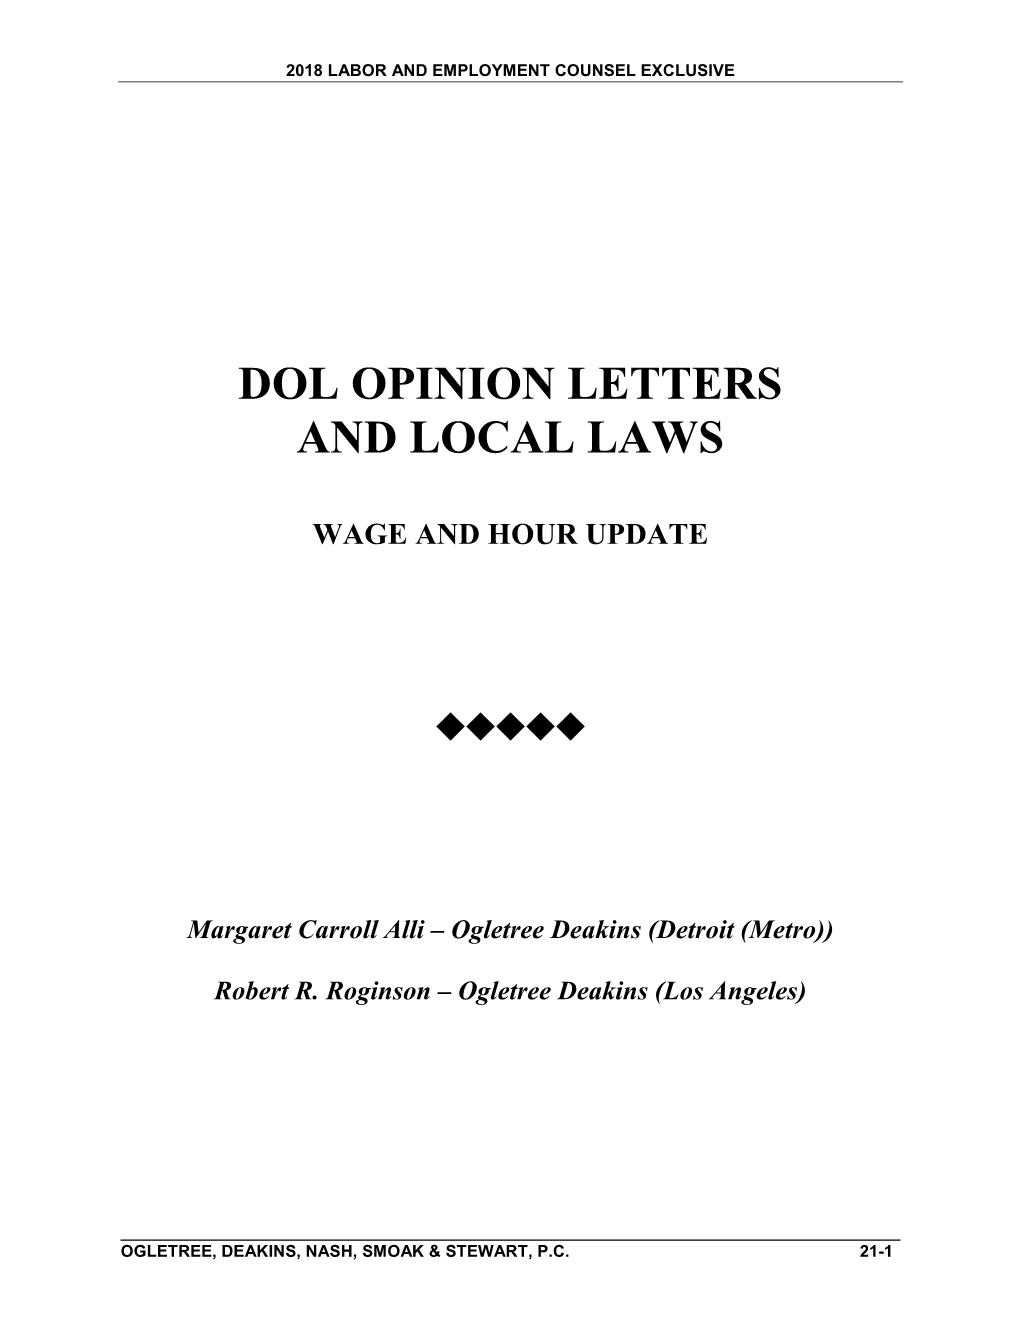 Dol Opinion Letters and Local Laws